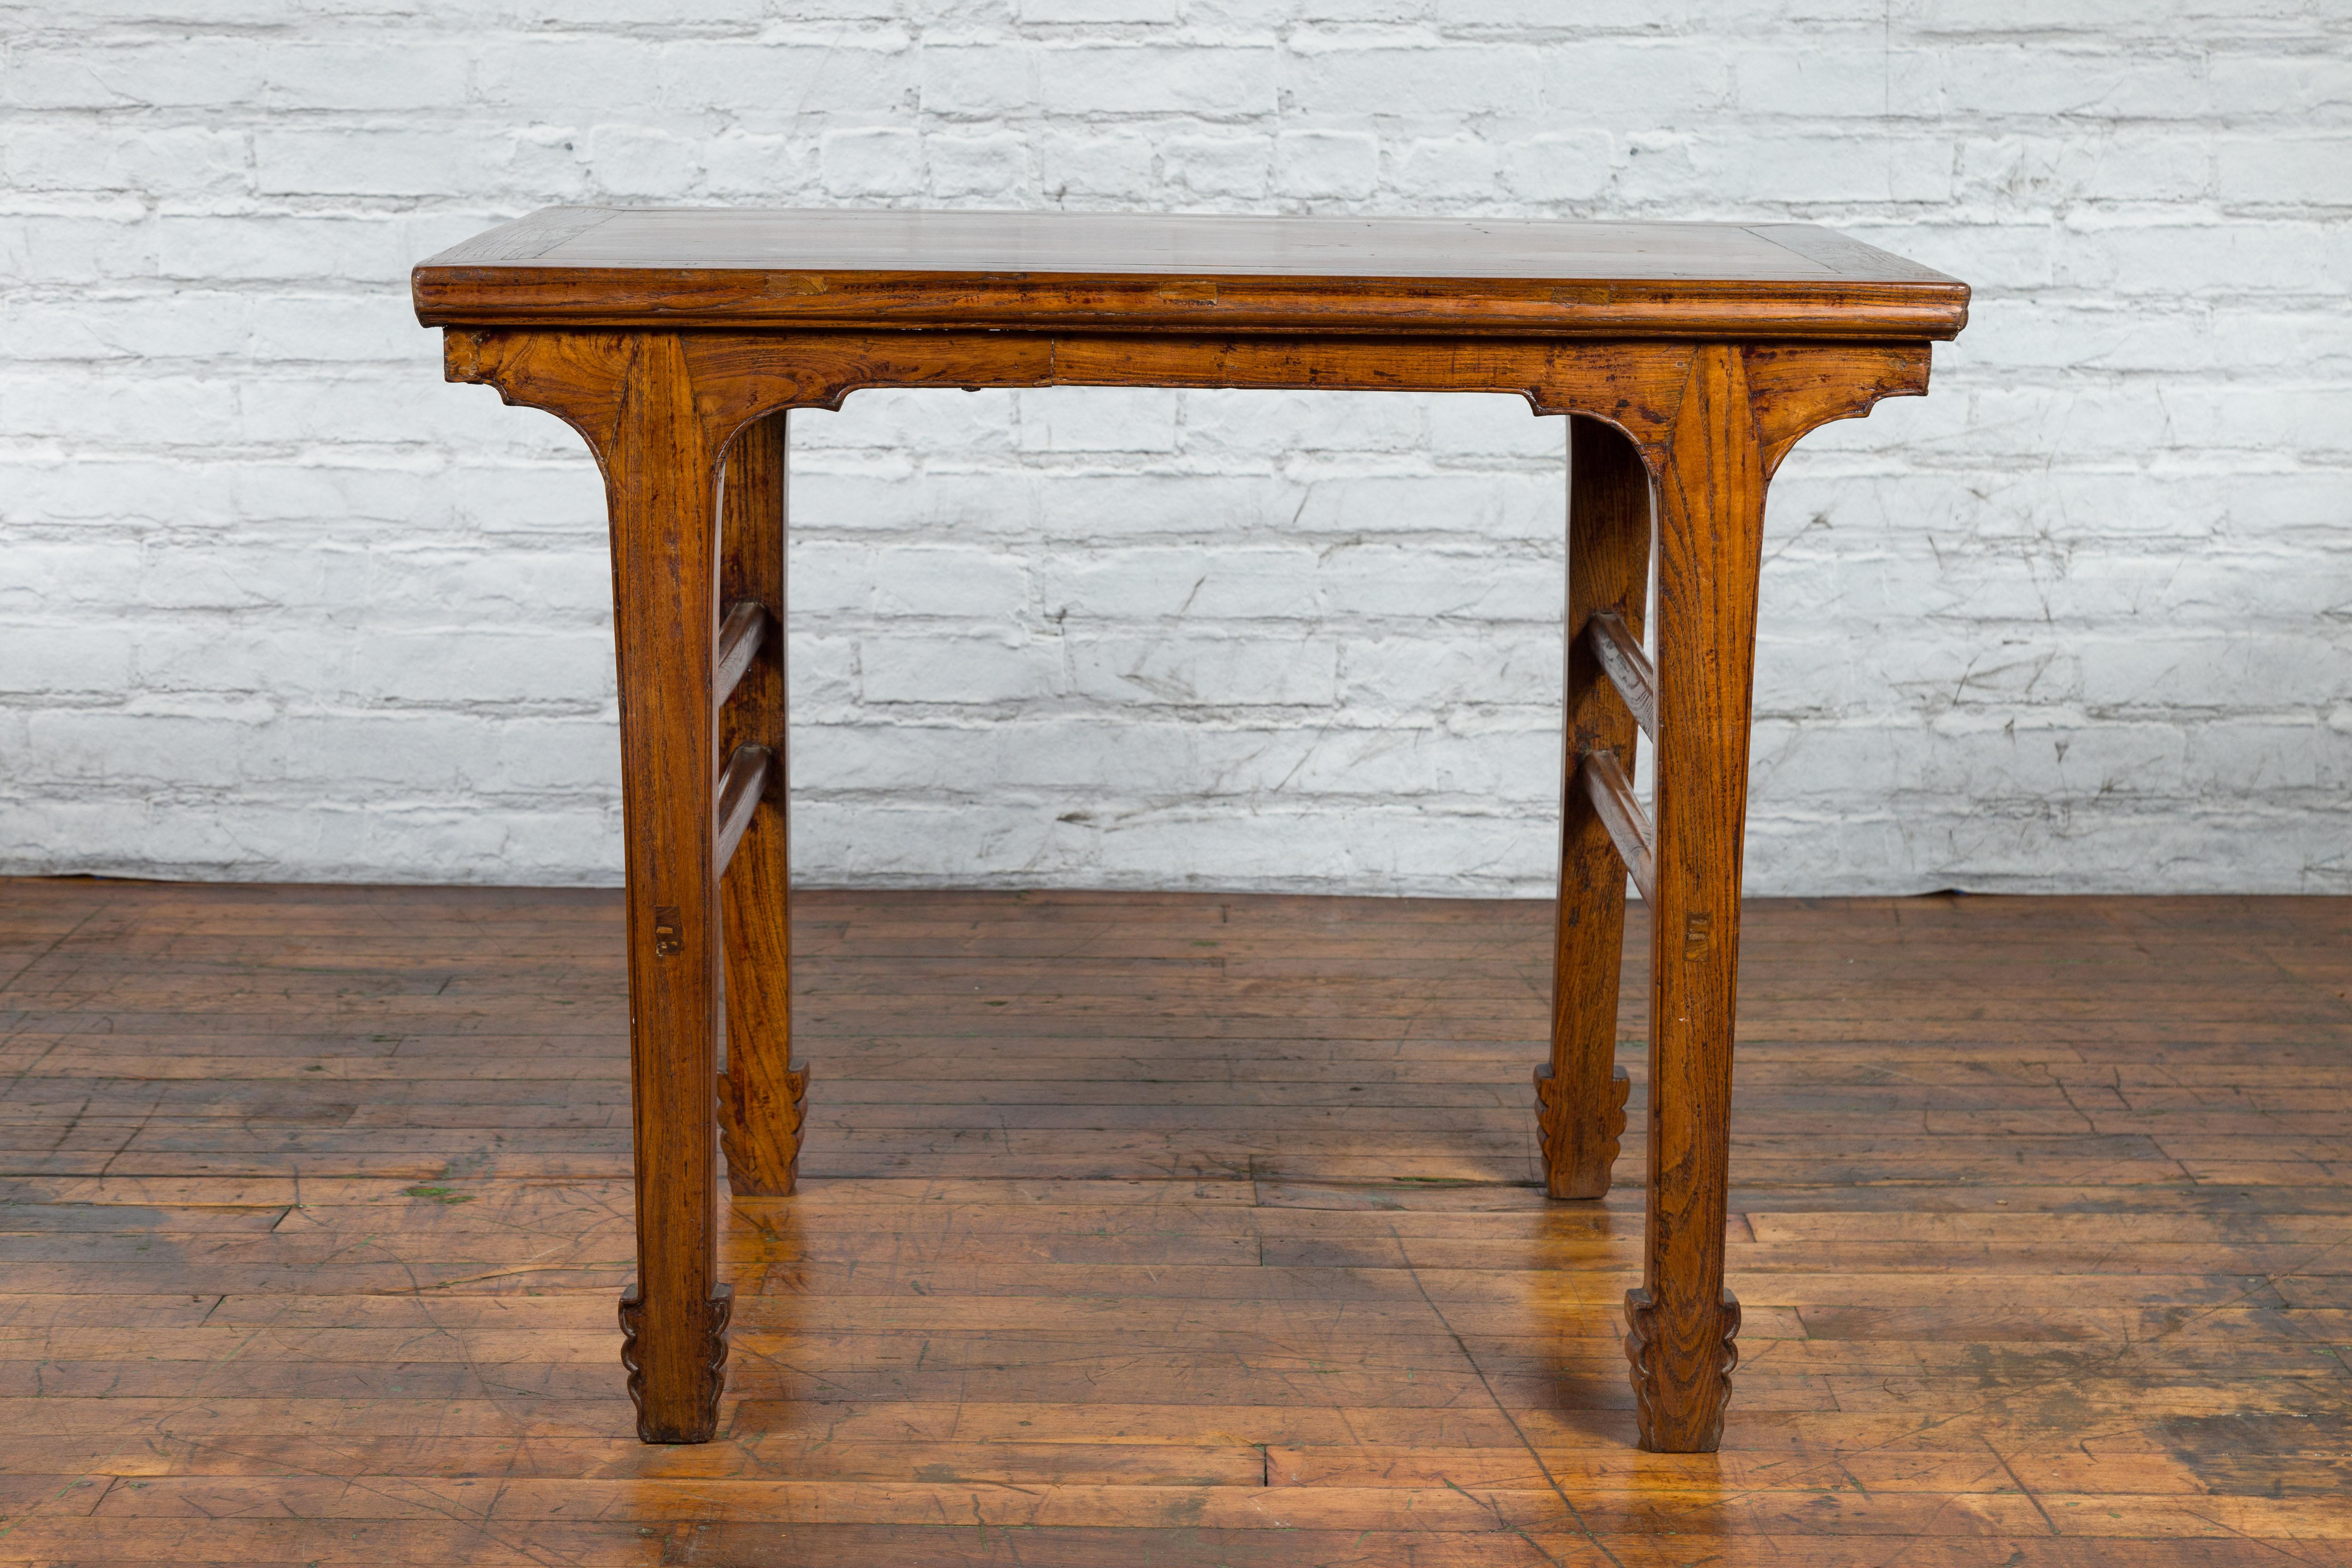 A vintage Chinese elm wood wine table from the early 20th century, with carved apron and legs, as well as double side stretchers. Created in China during the late Qing Dynasty in the early years of the 20th century, this wine table features a